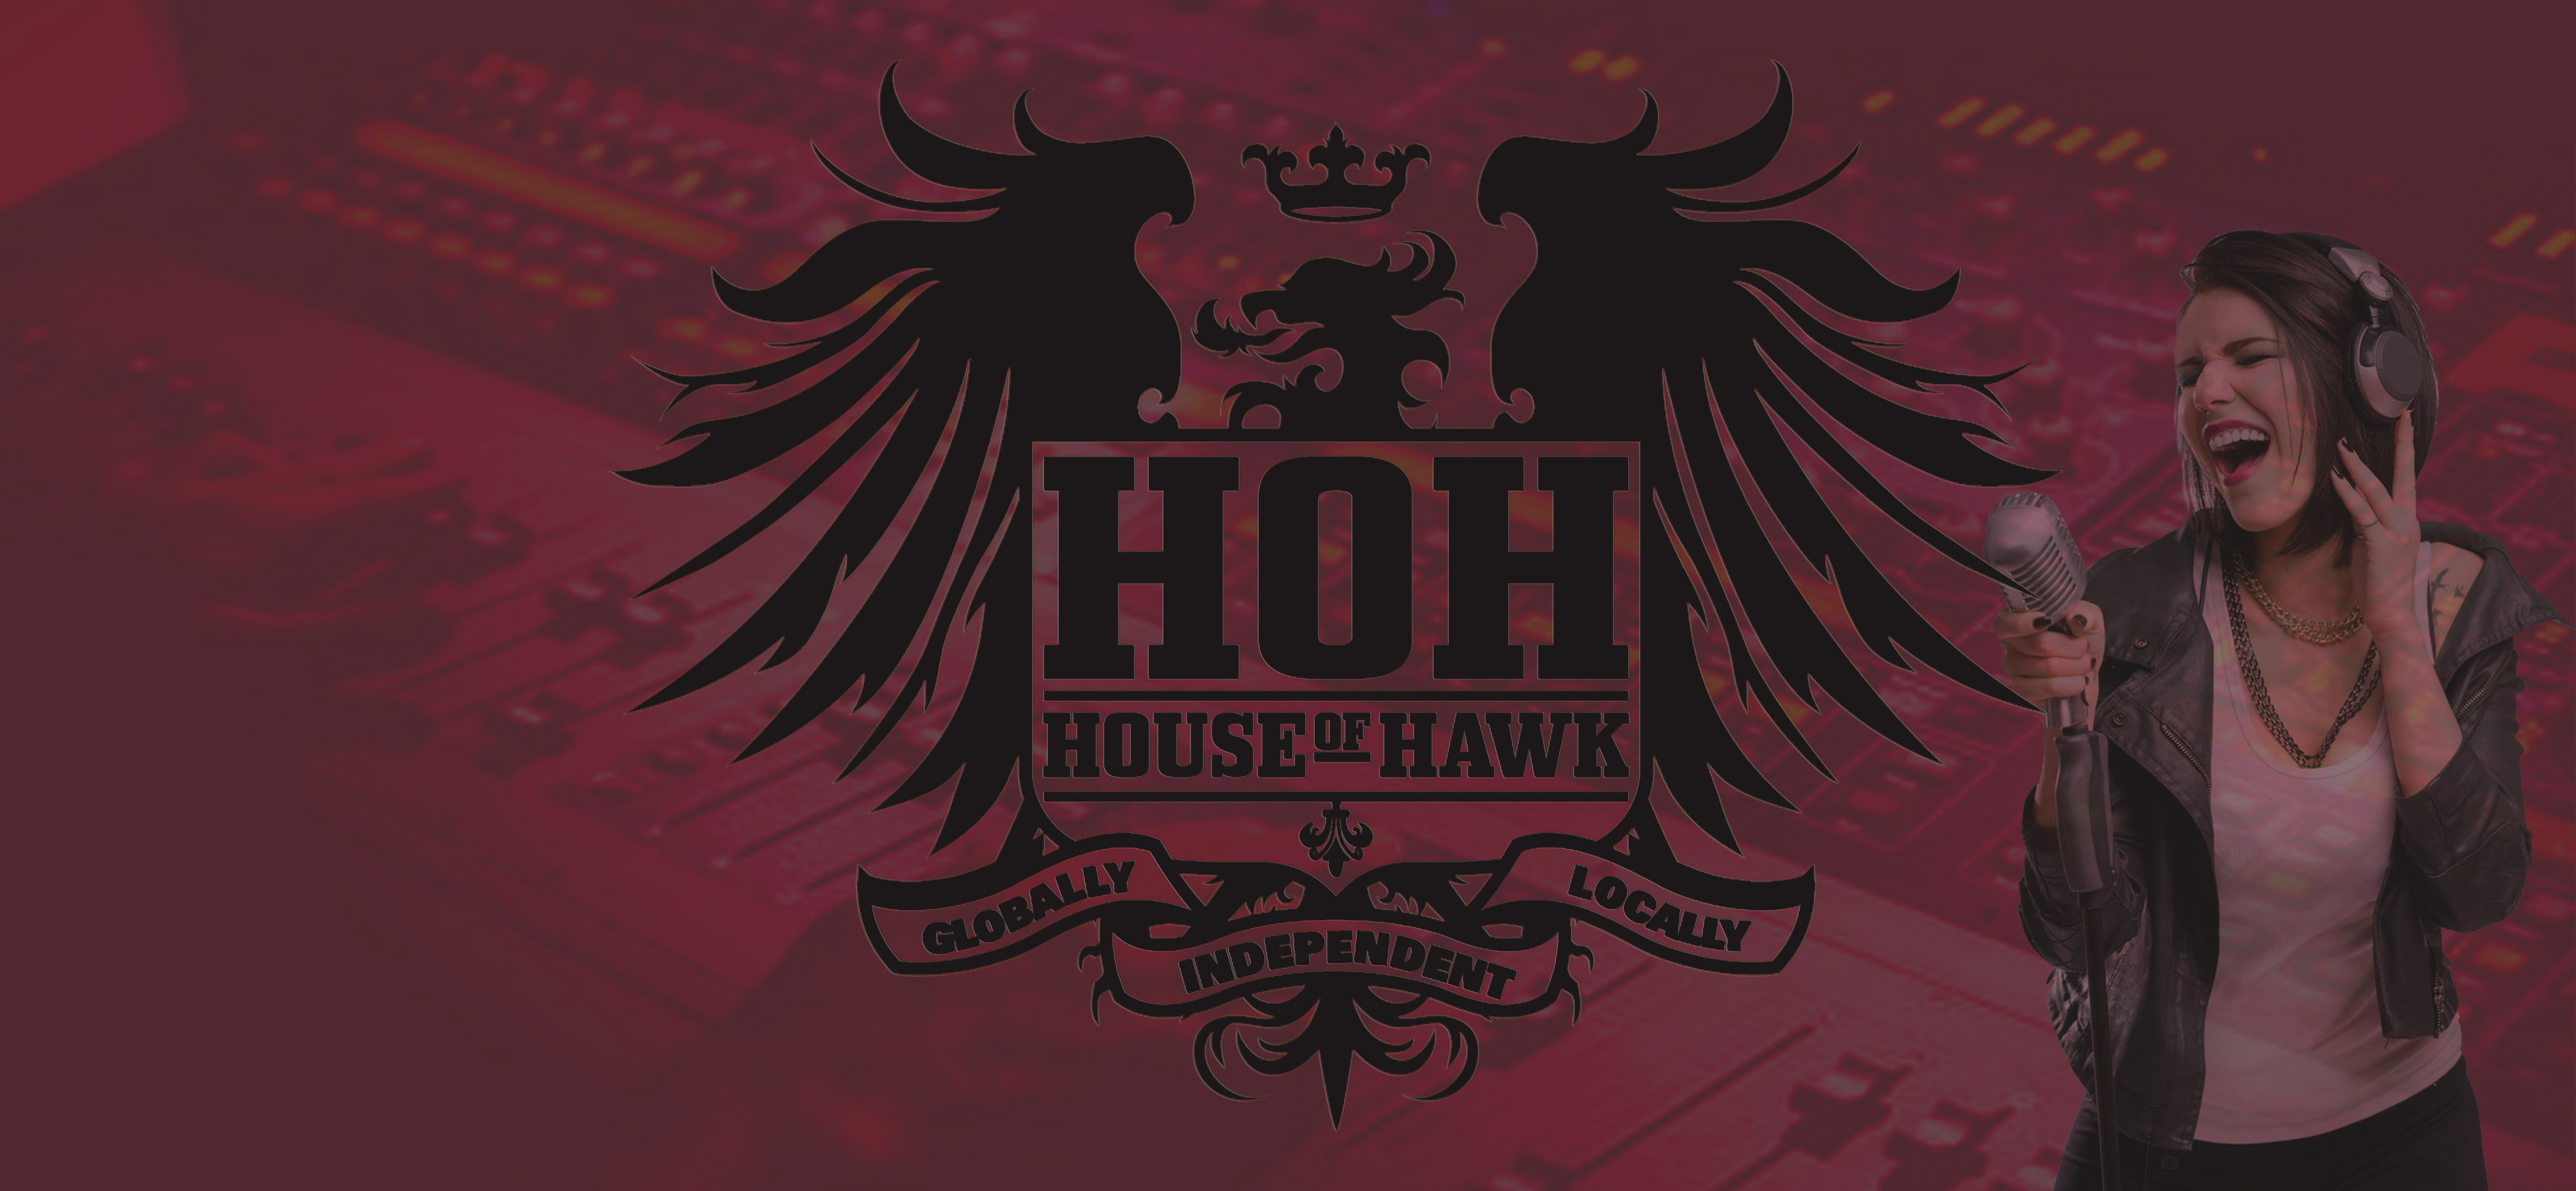 House of Hawke Musician Promotion